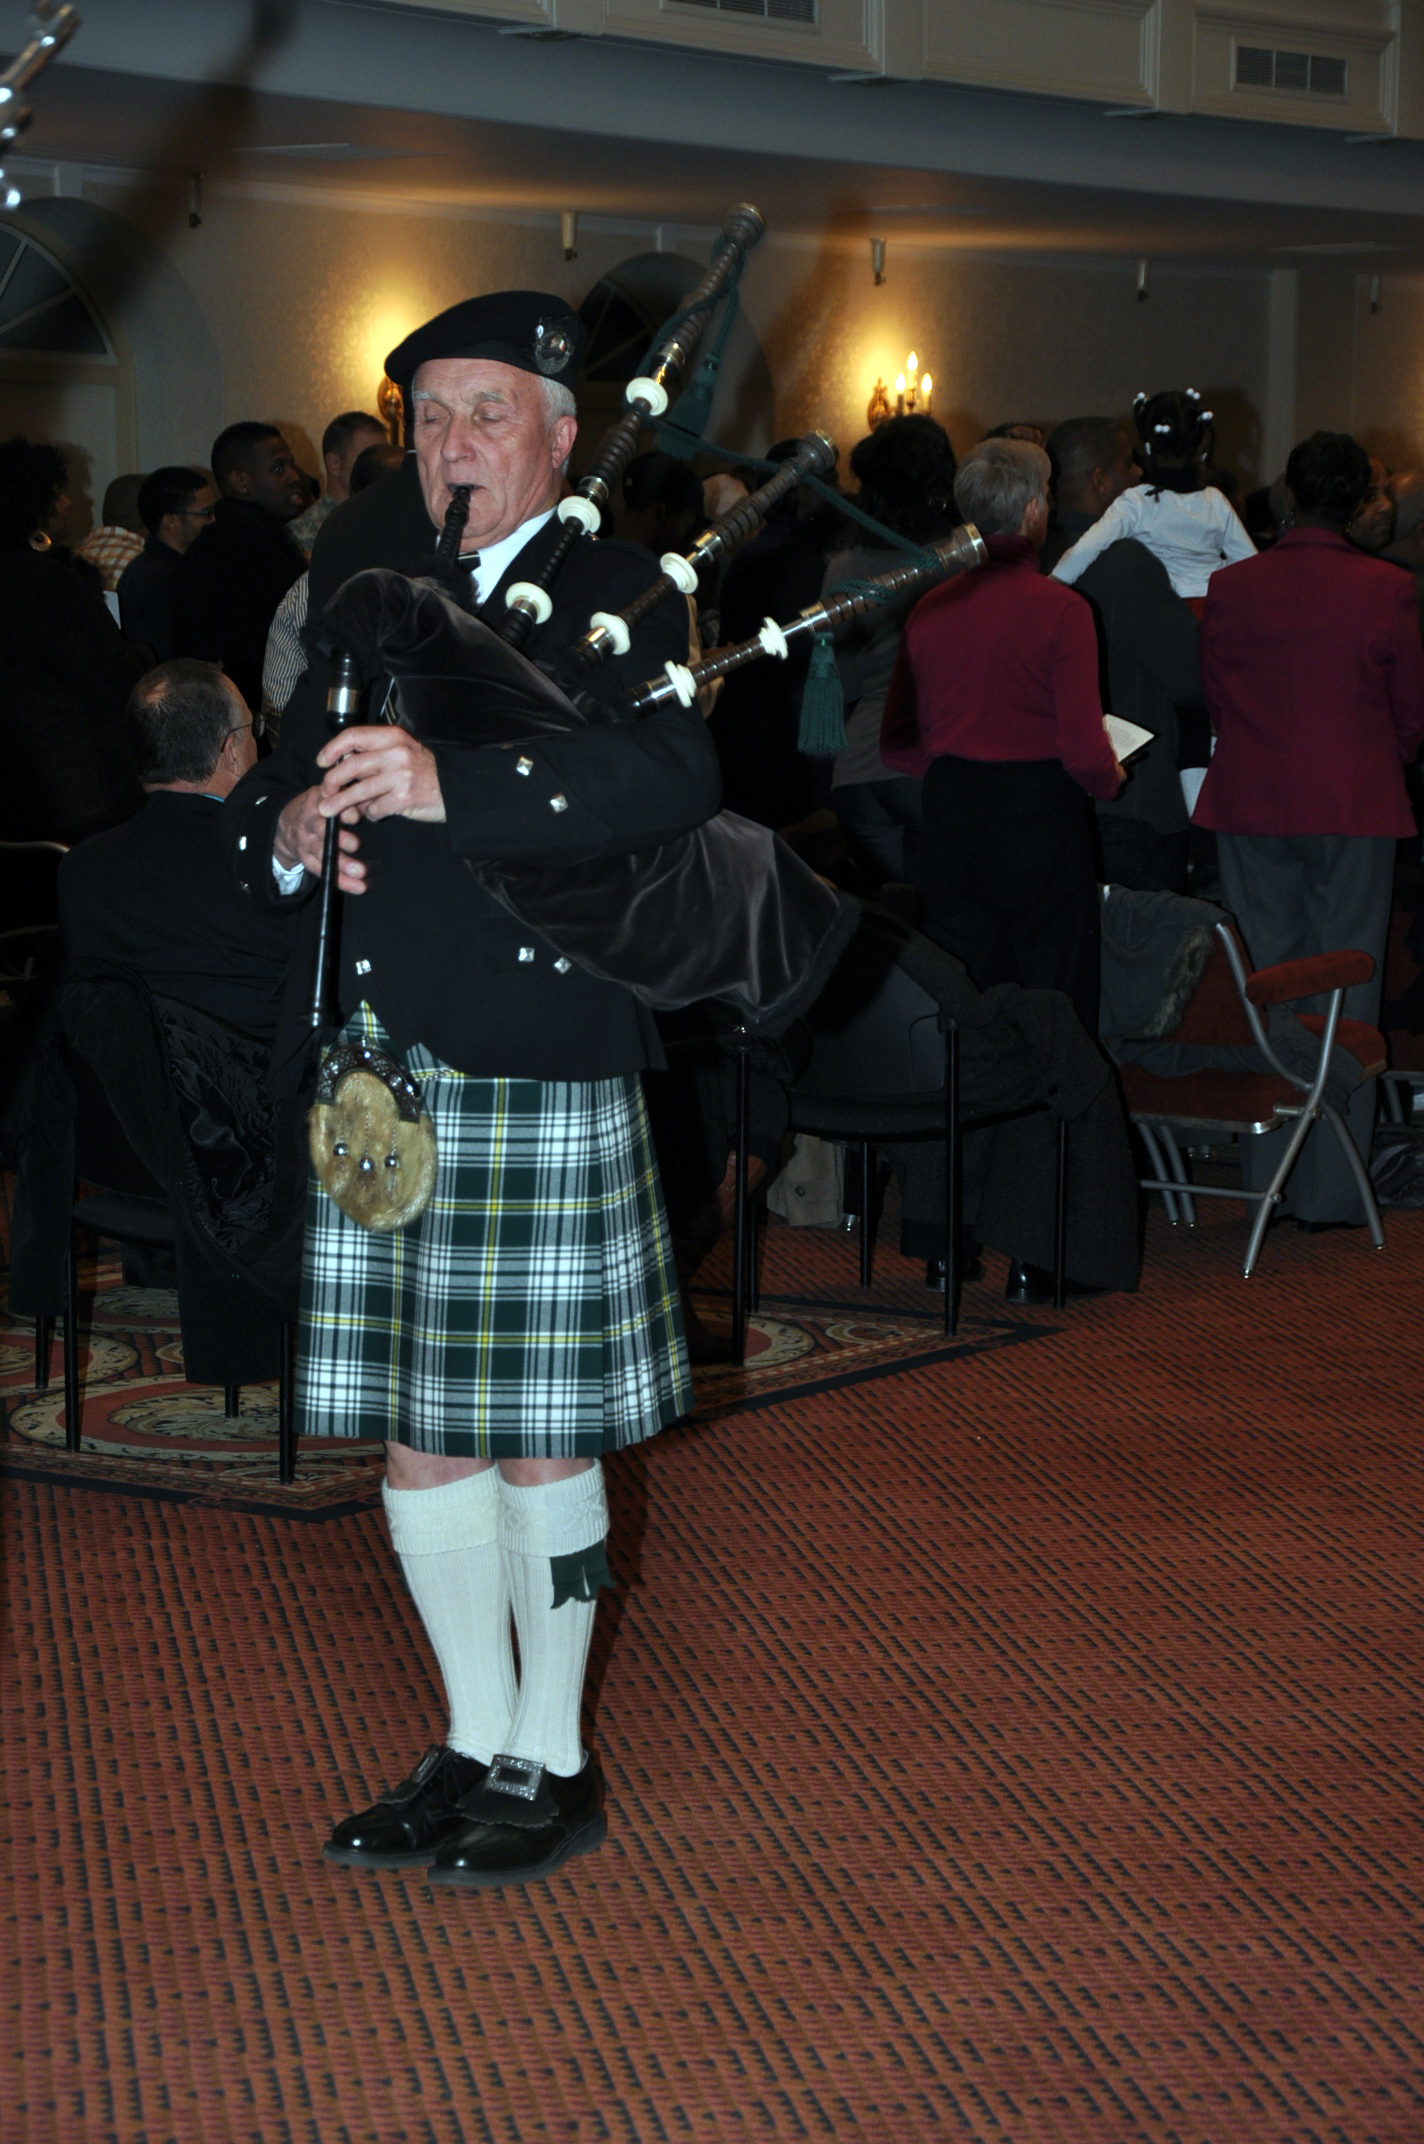 Bagpipes at event